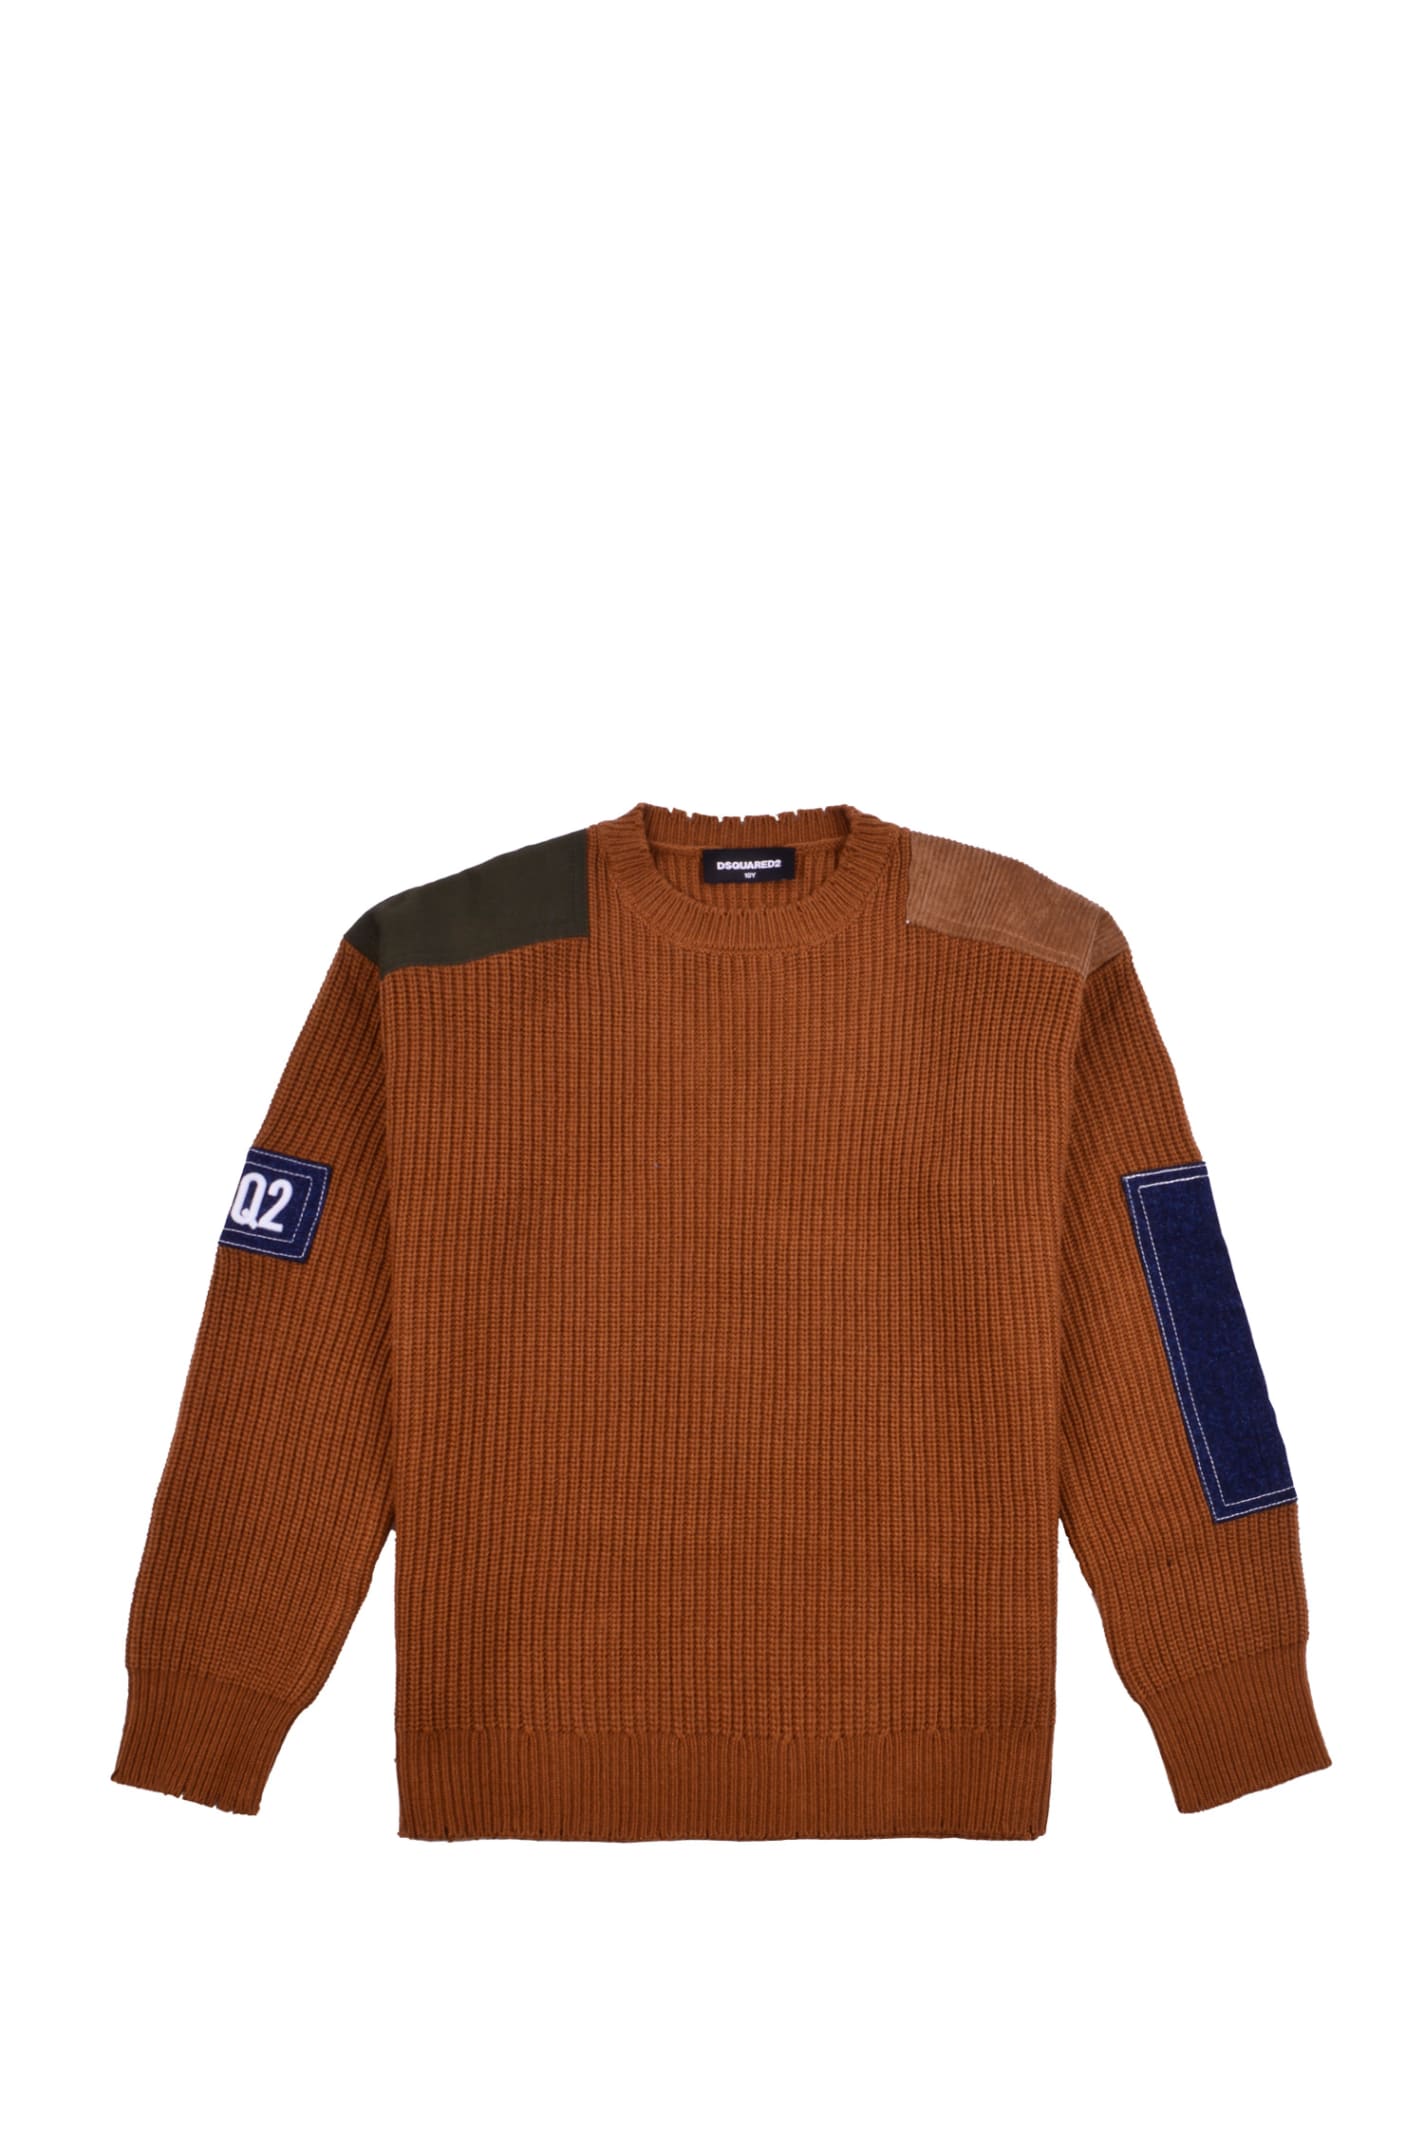 Dsquared2 Wool Blend Sweater With Patches